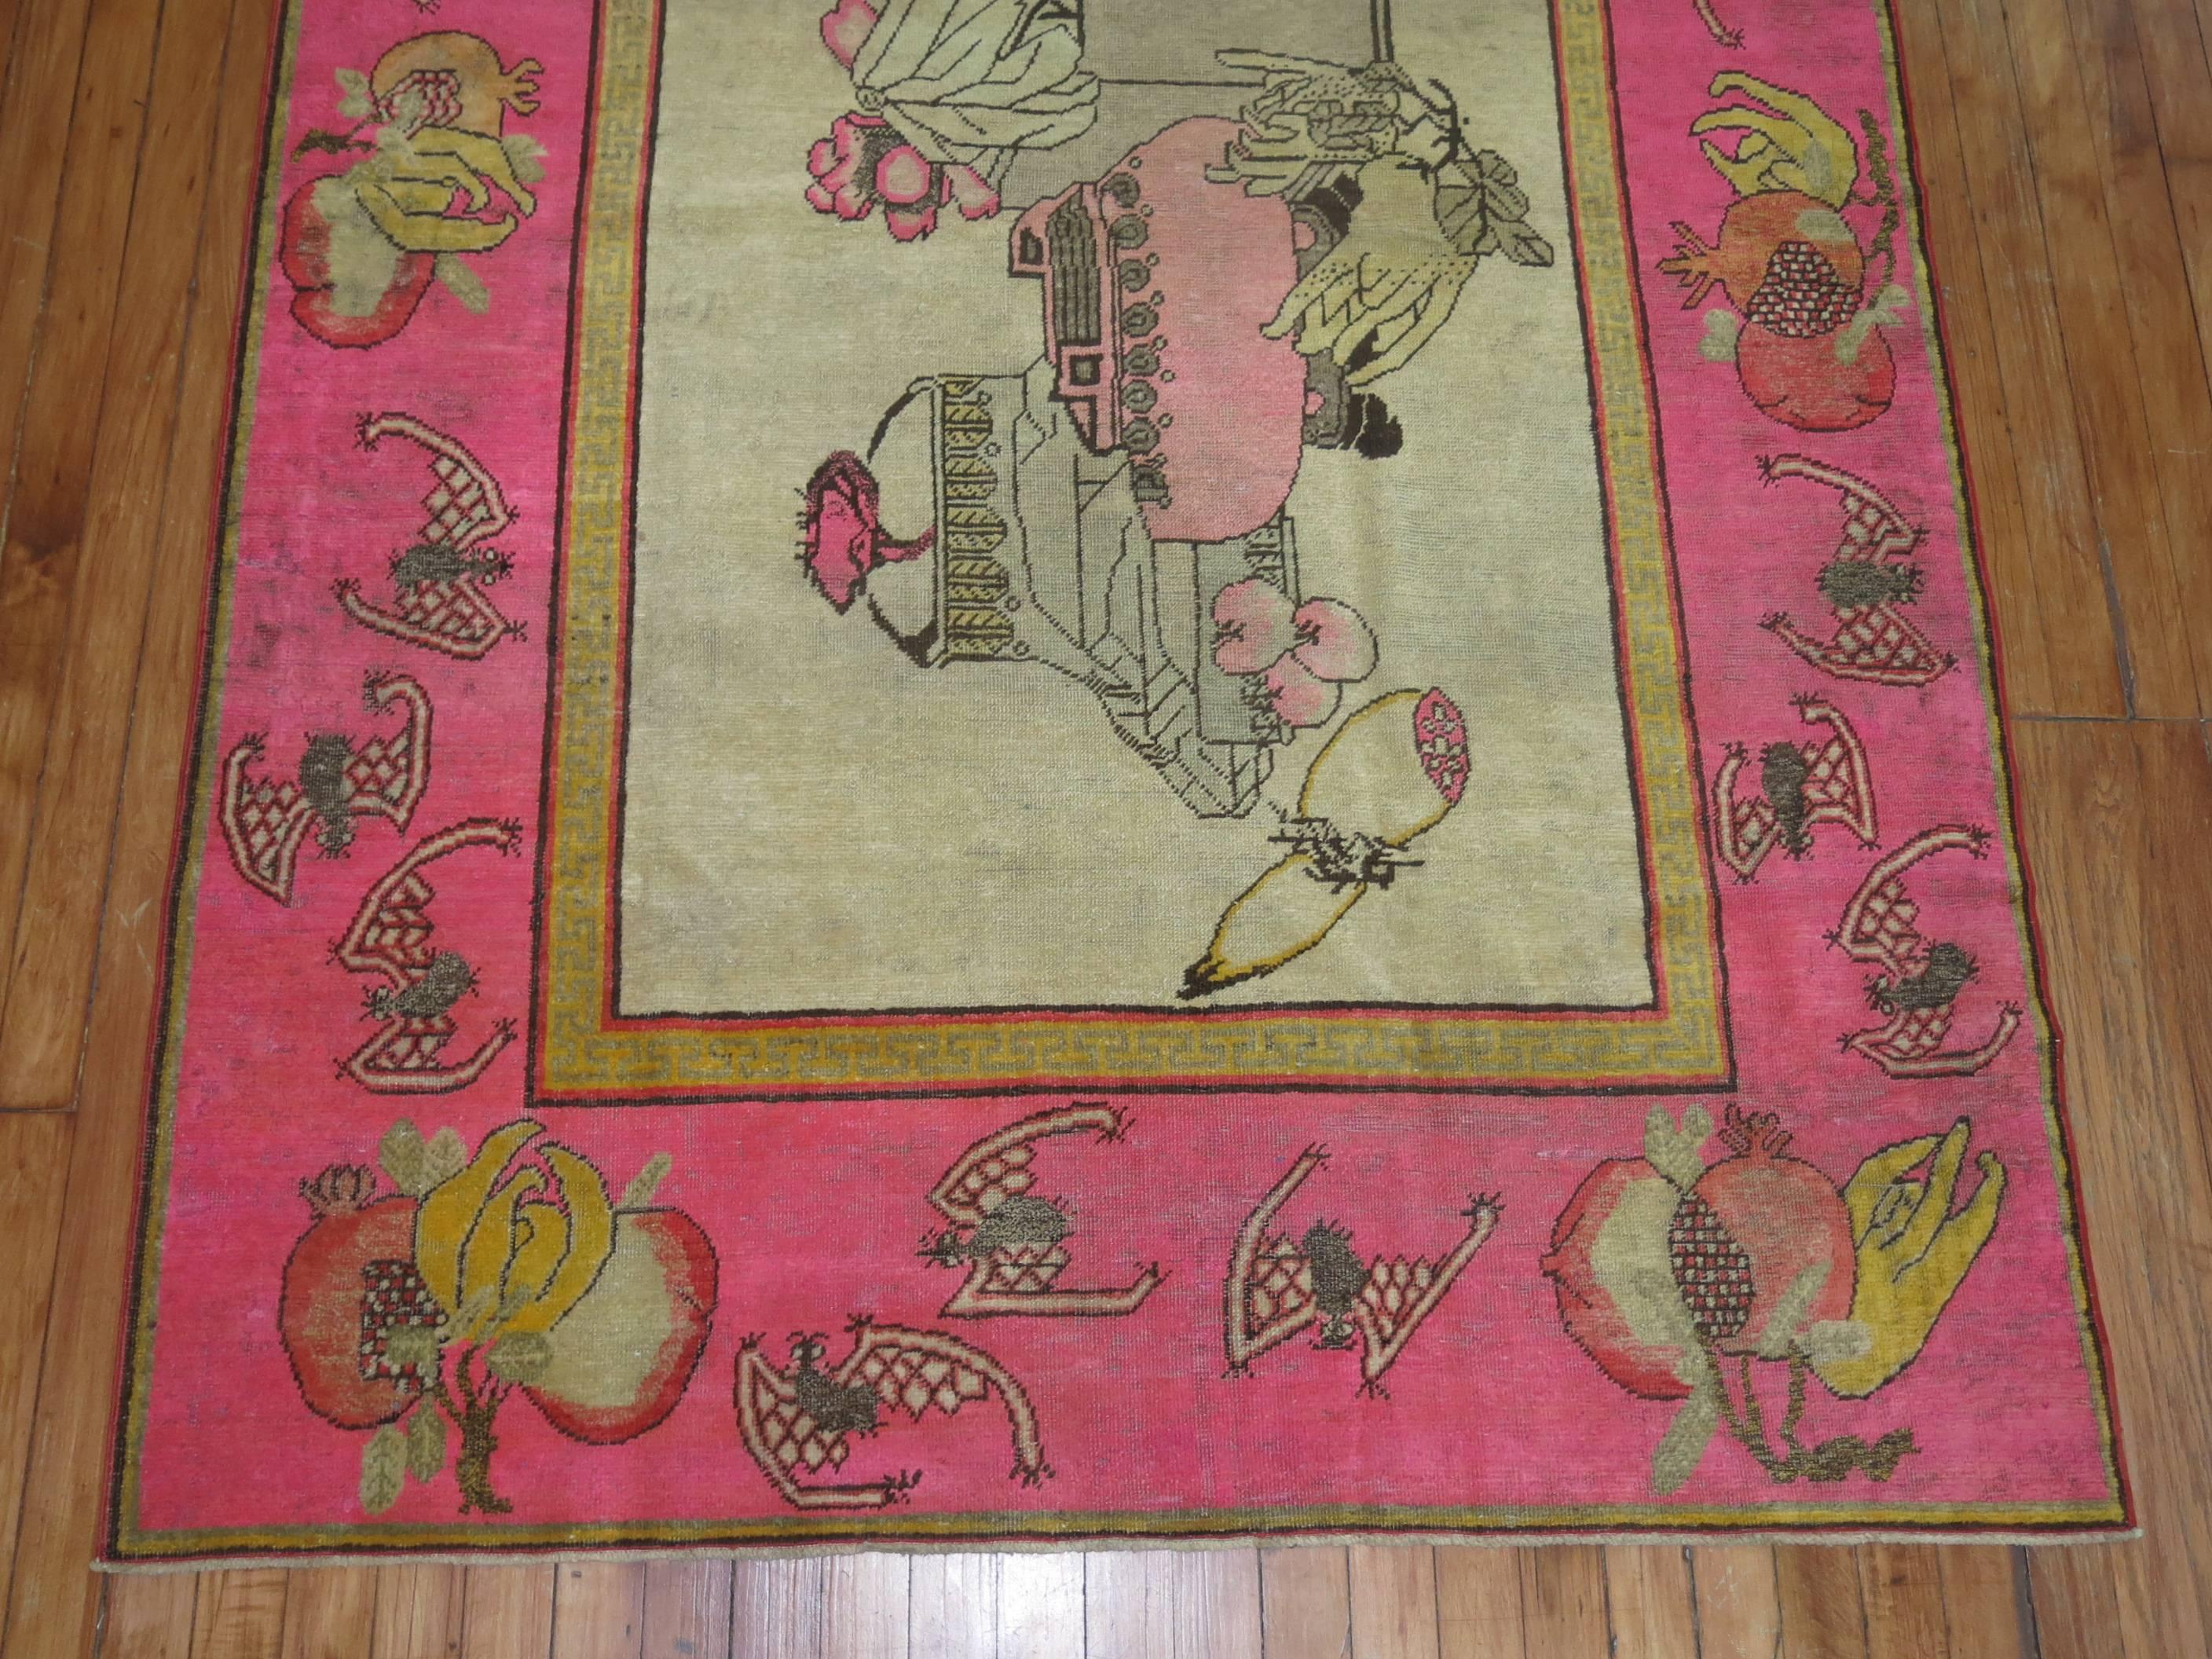 Antique Pictorial Khotan Rug with Bright Pink Border 1